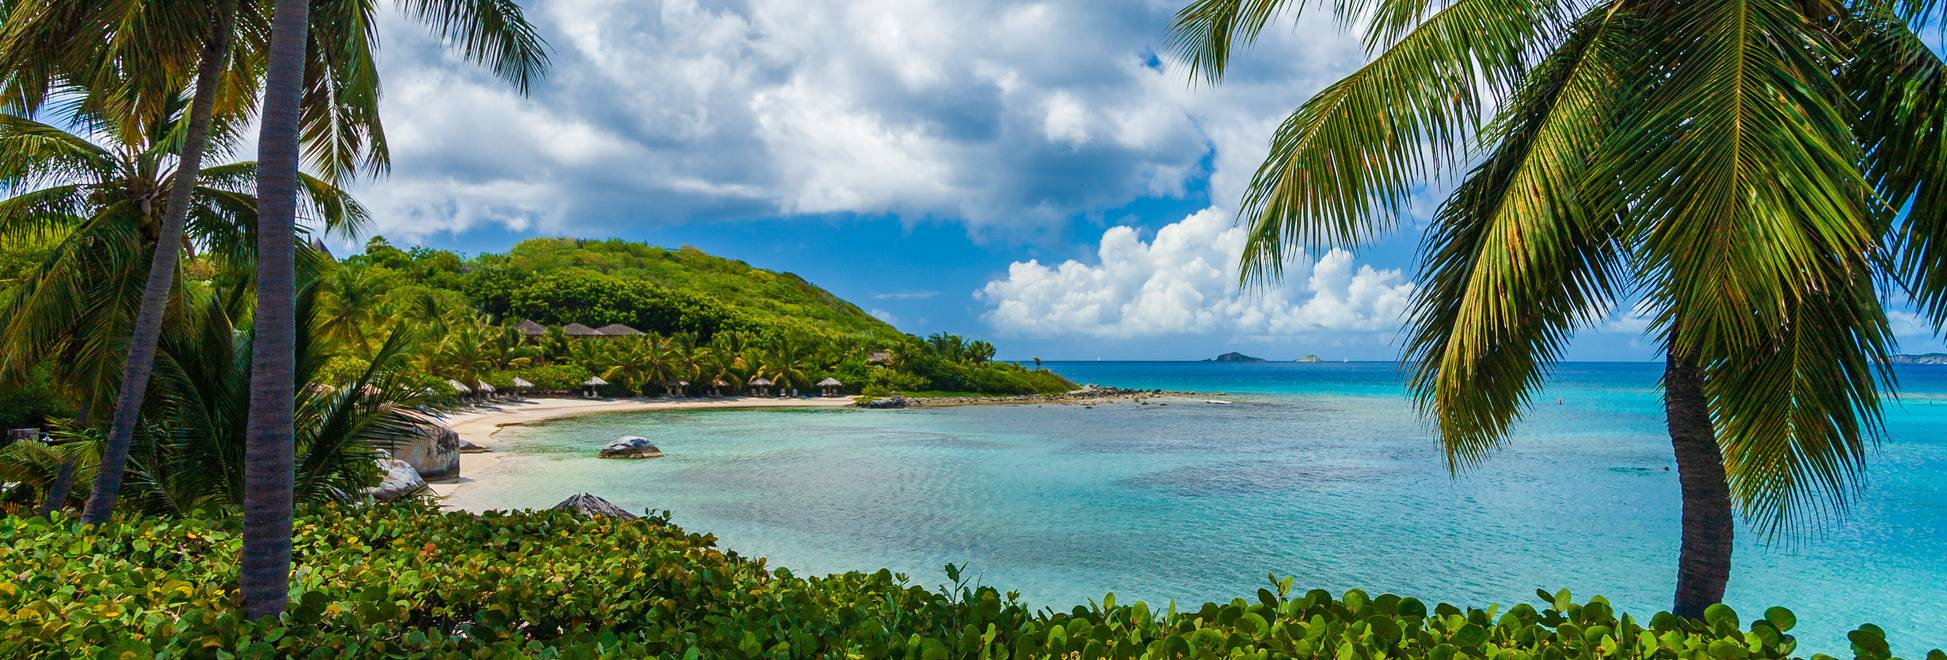 The Best Beaches in St Barts - BVI Yacht Charters